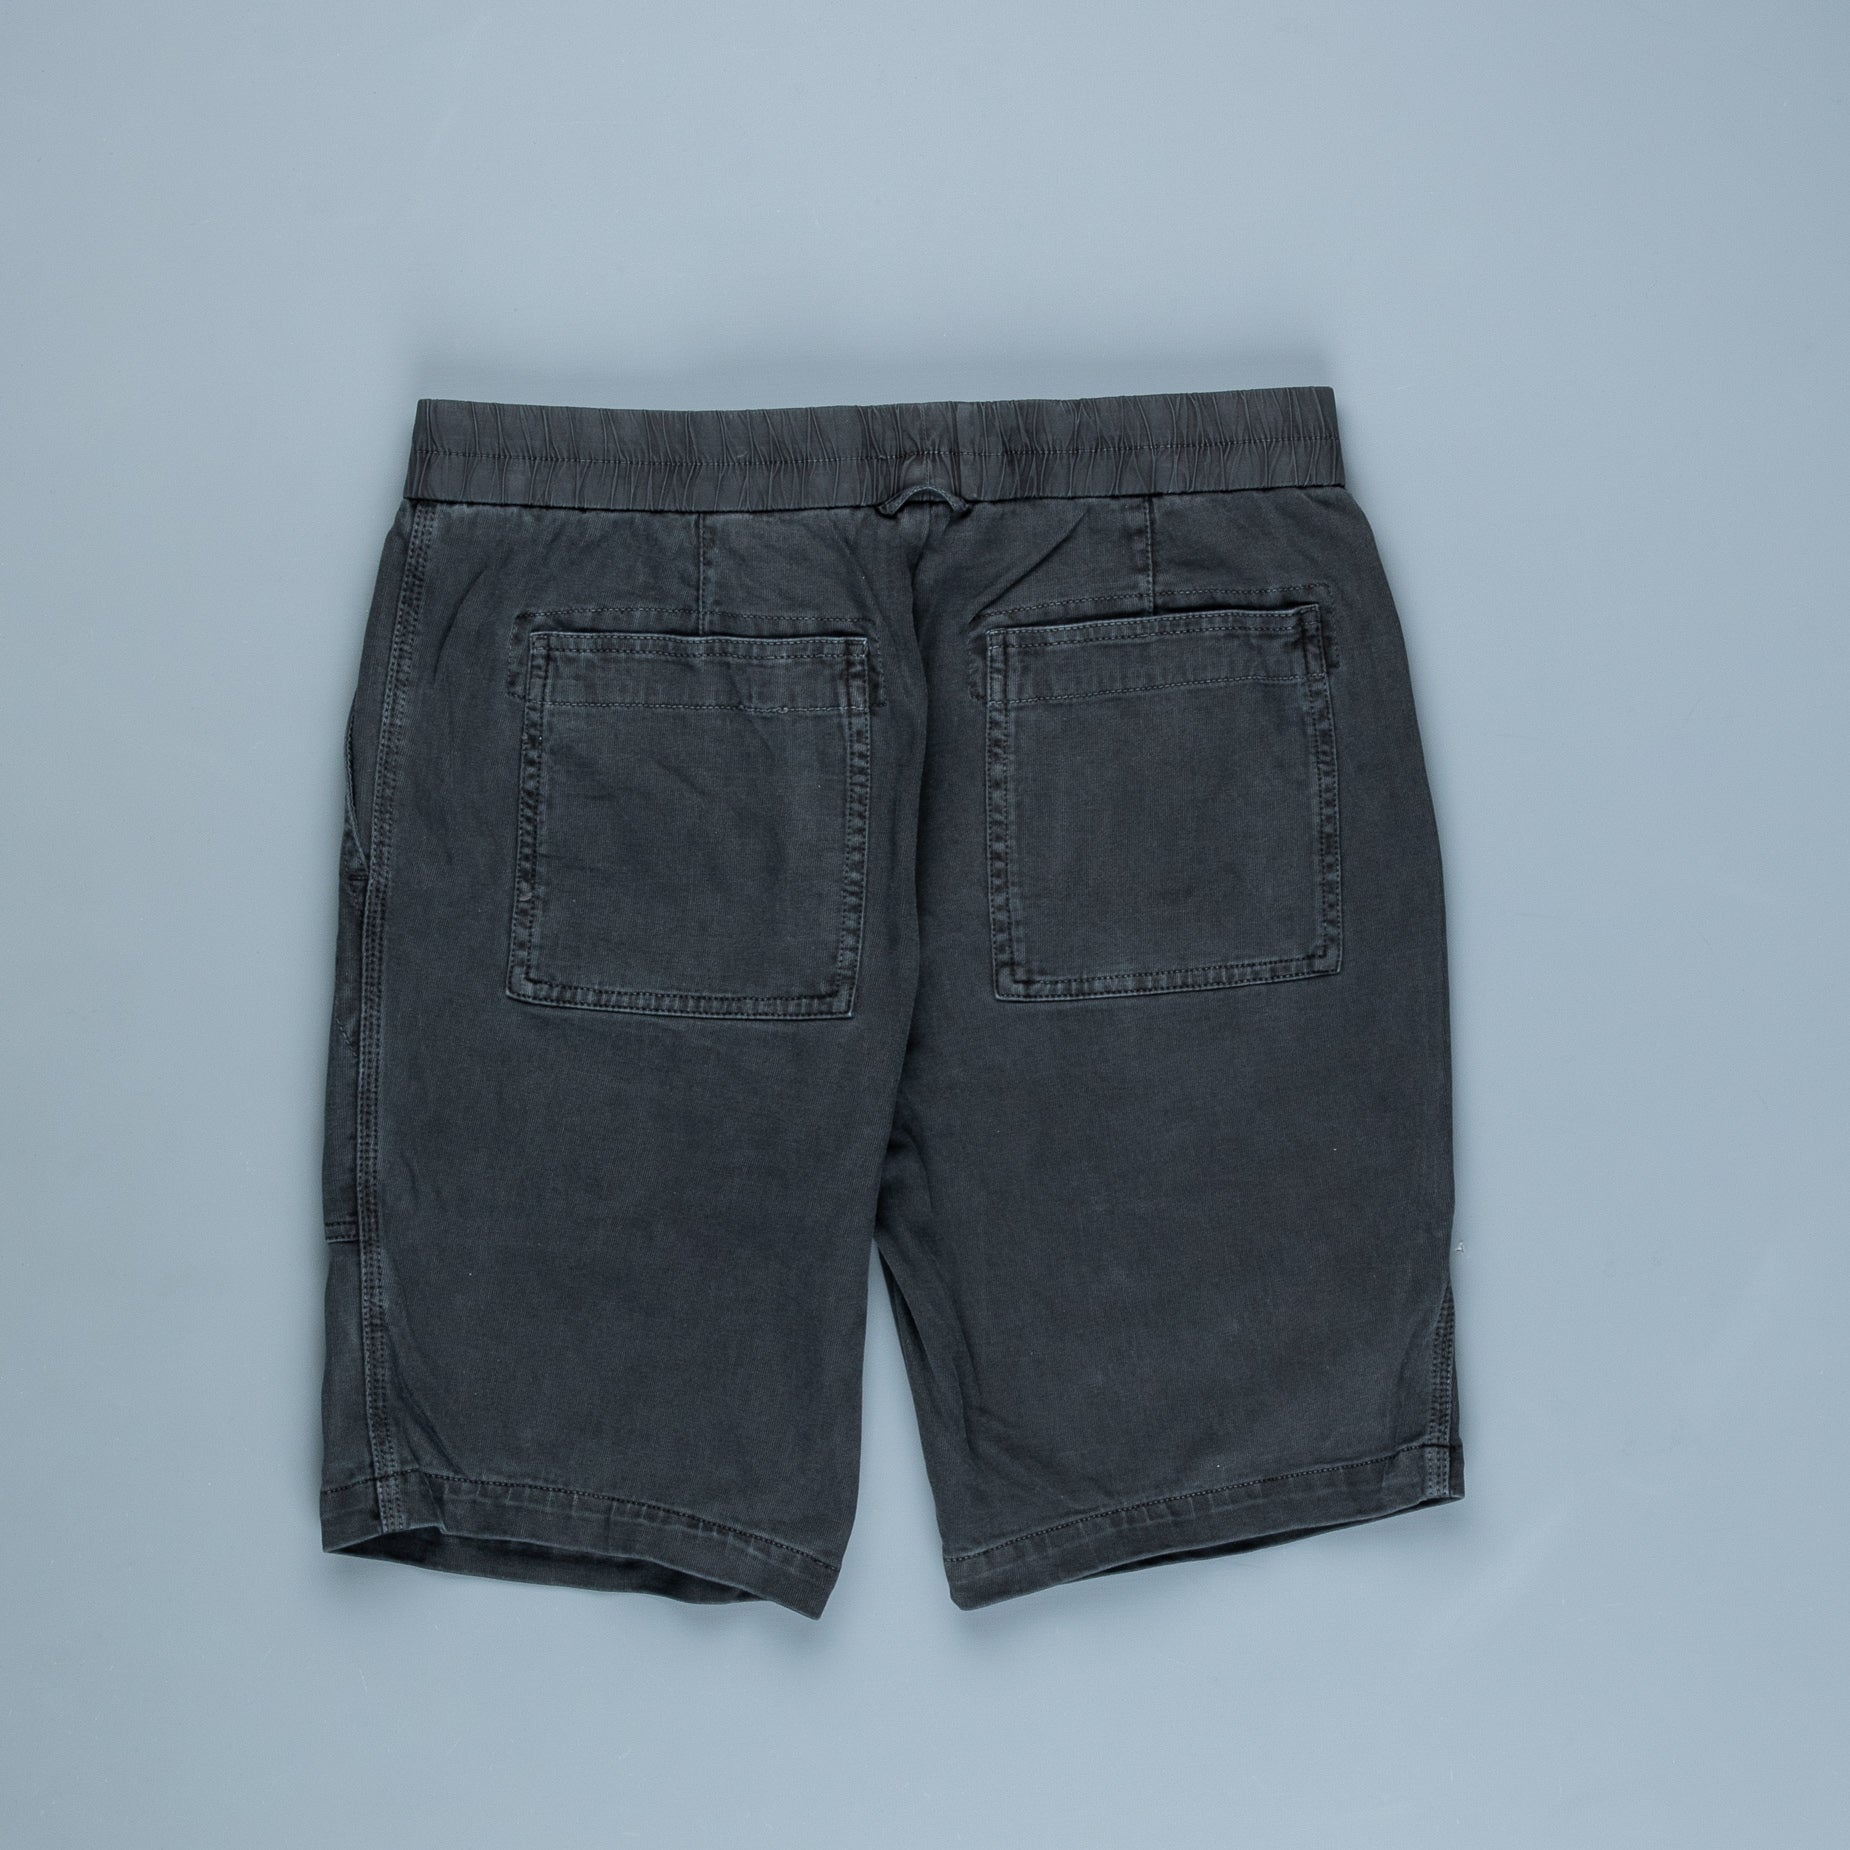 James Perse Heavy jersey utility short Magma